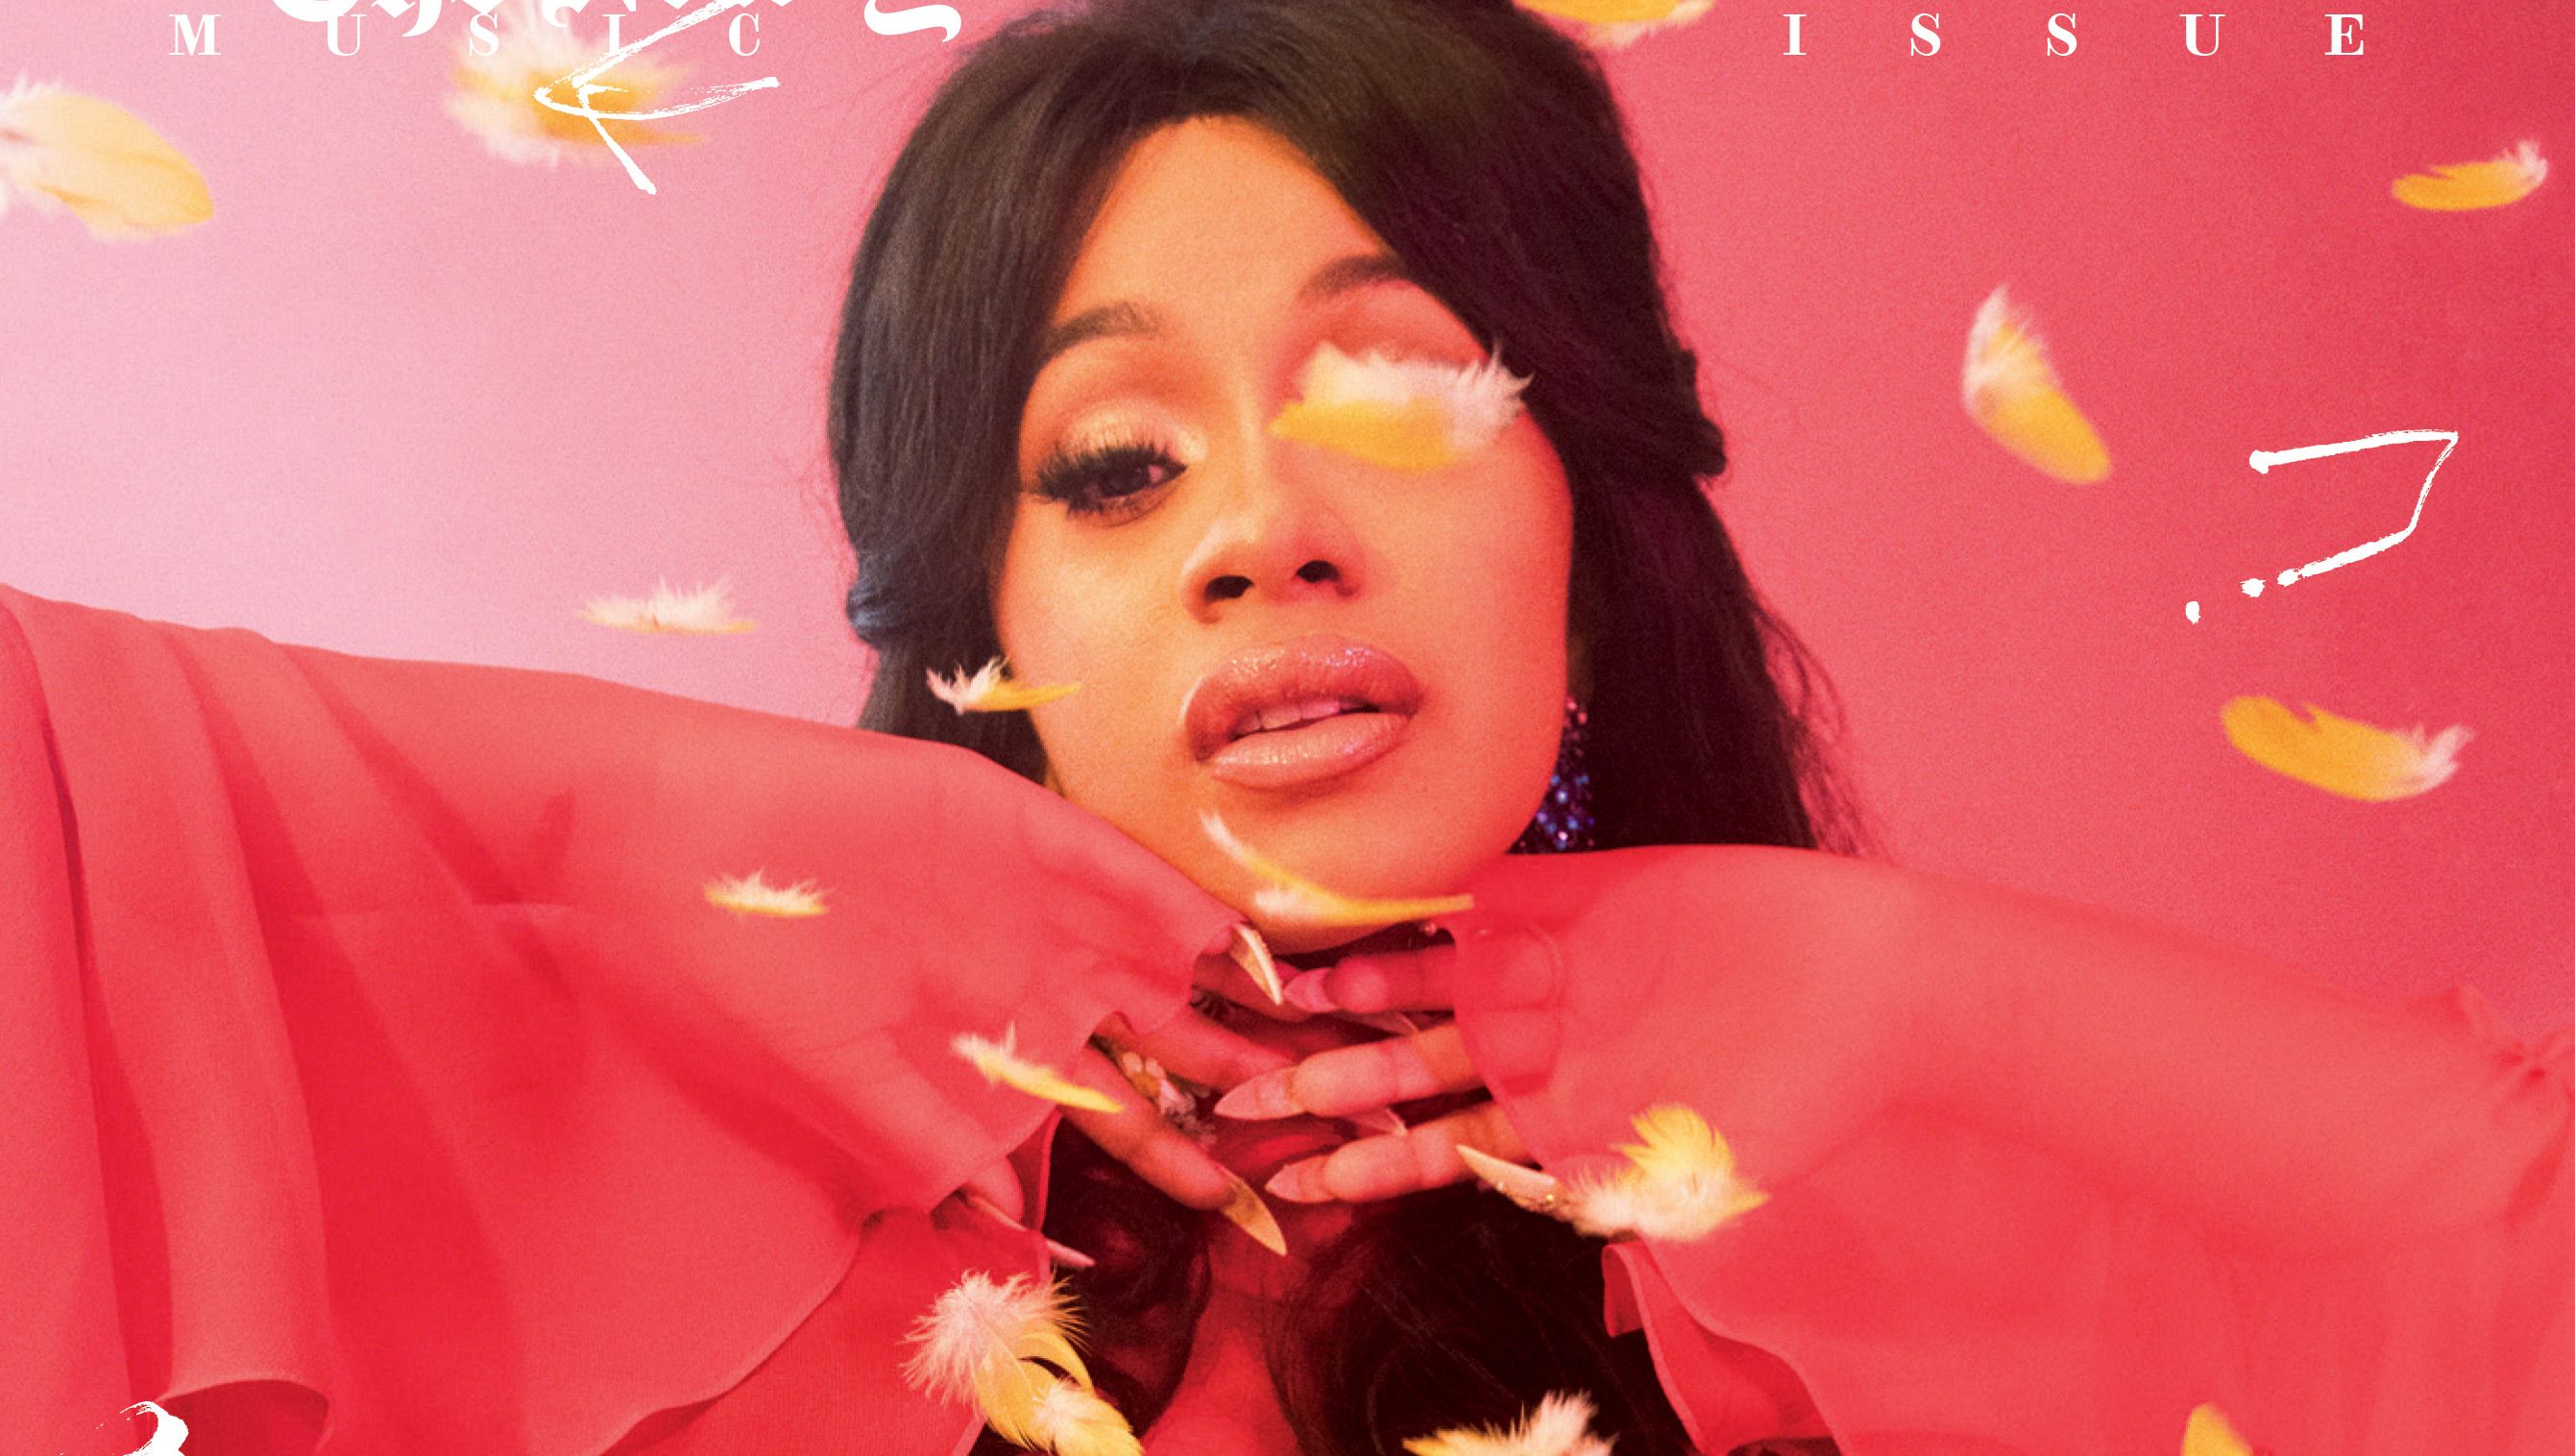 Cardi B 2018 iPhone iPhone 6S, iPhone 7 HD 4k Wallpaper, Image, Background, Photo and Picture